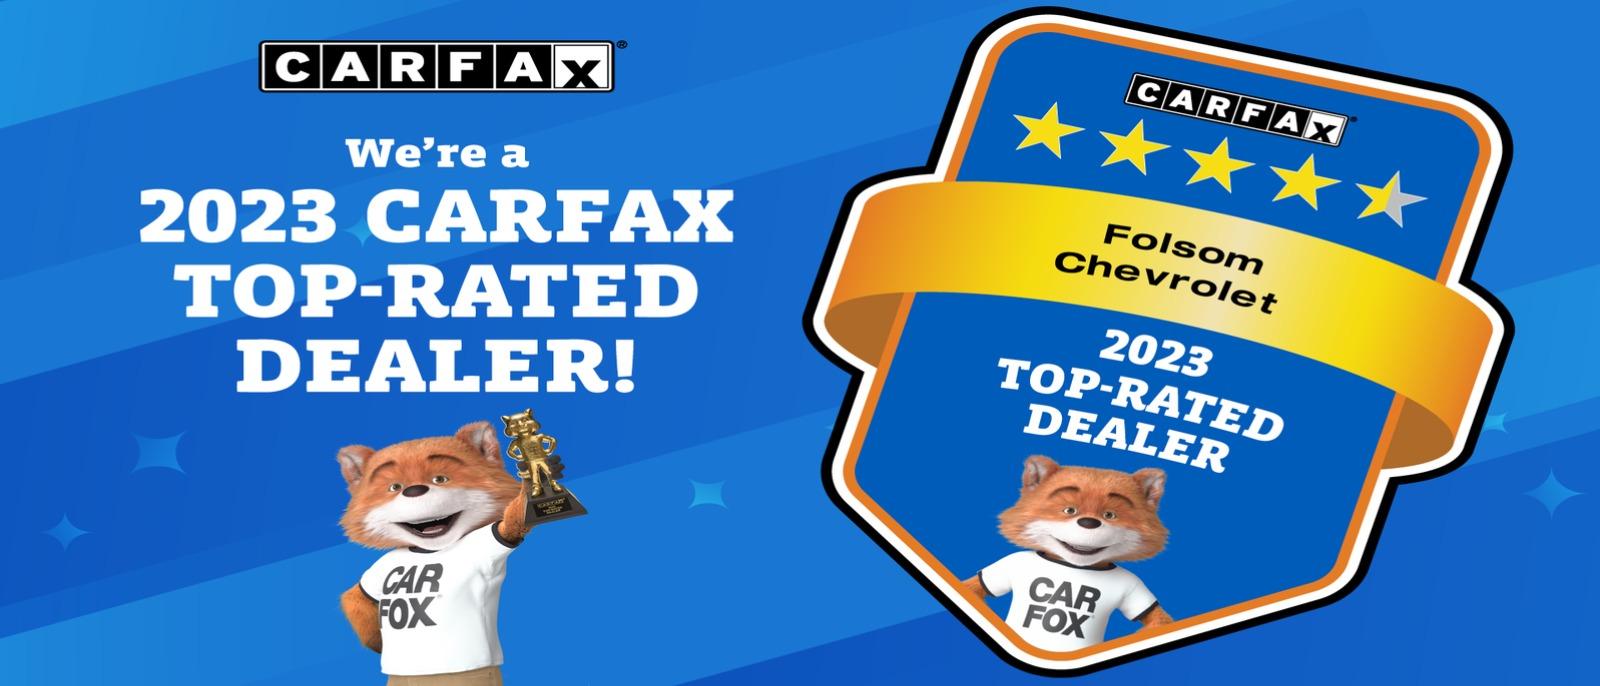 FOLSOM CHEVROLET CARFAX TOP RATED DEALER